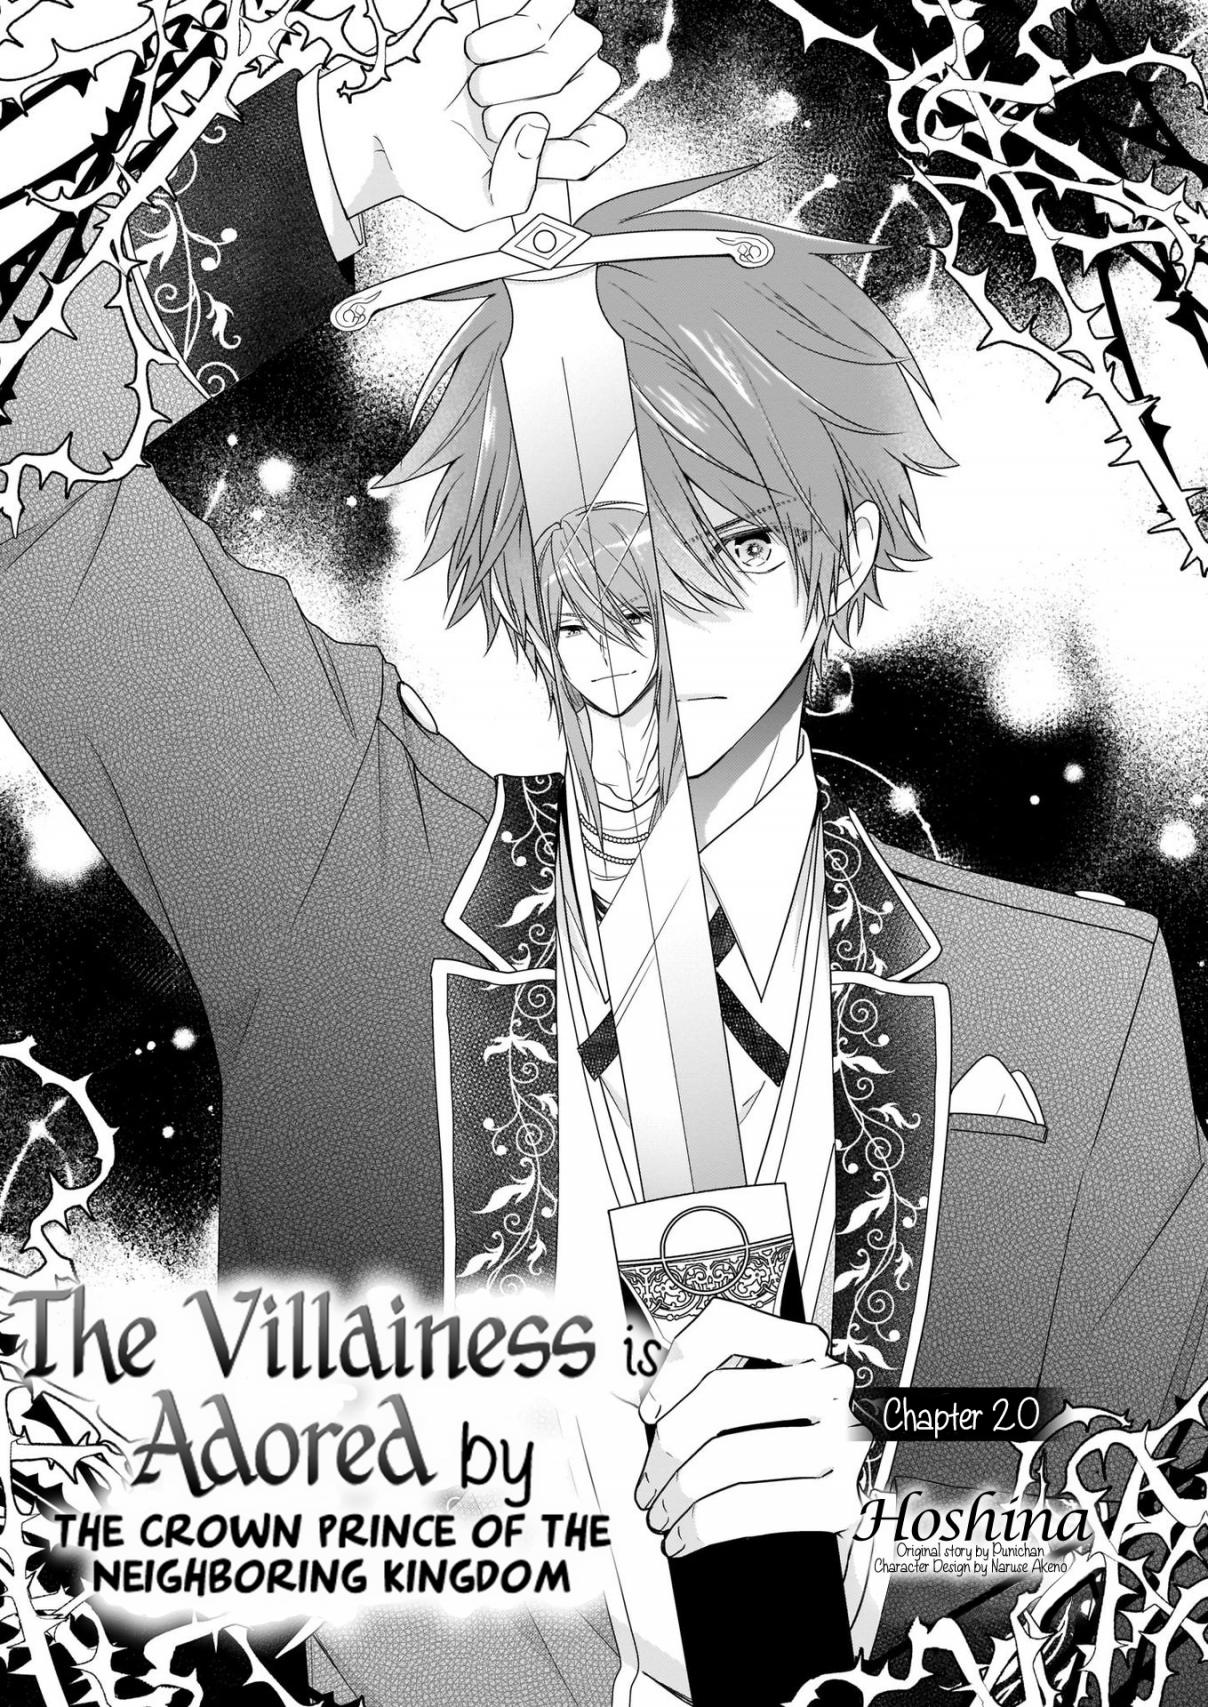 The Villainess Is Adored by the Crown Prince of the Neighboring Kingdom Vol. 5 Ch. 20